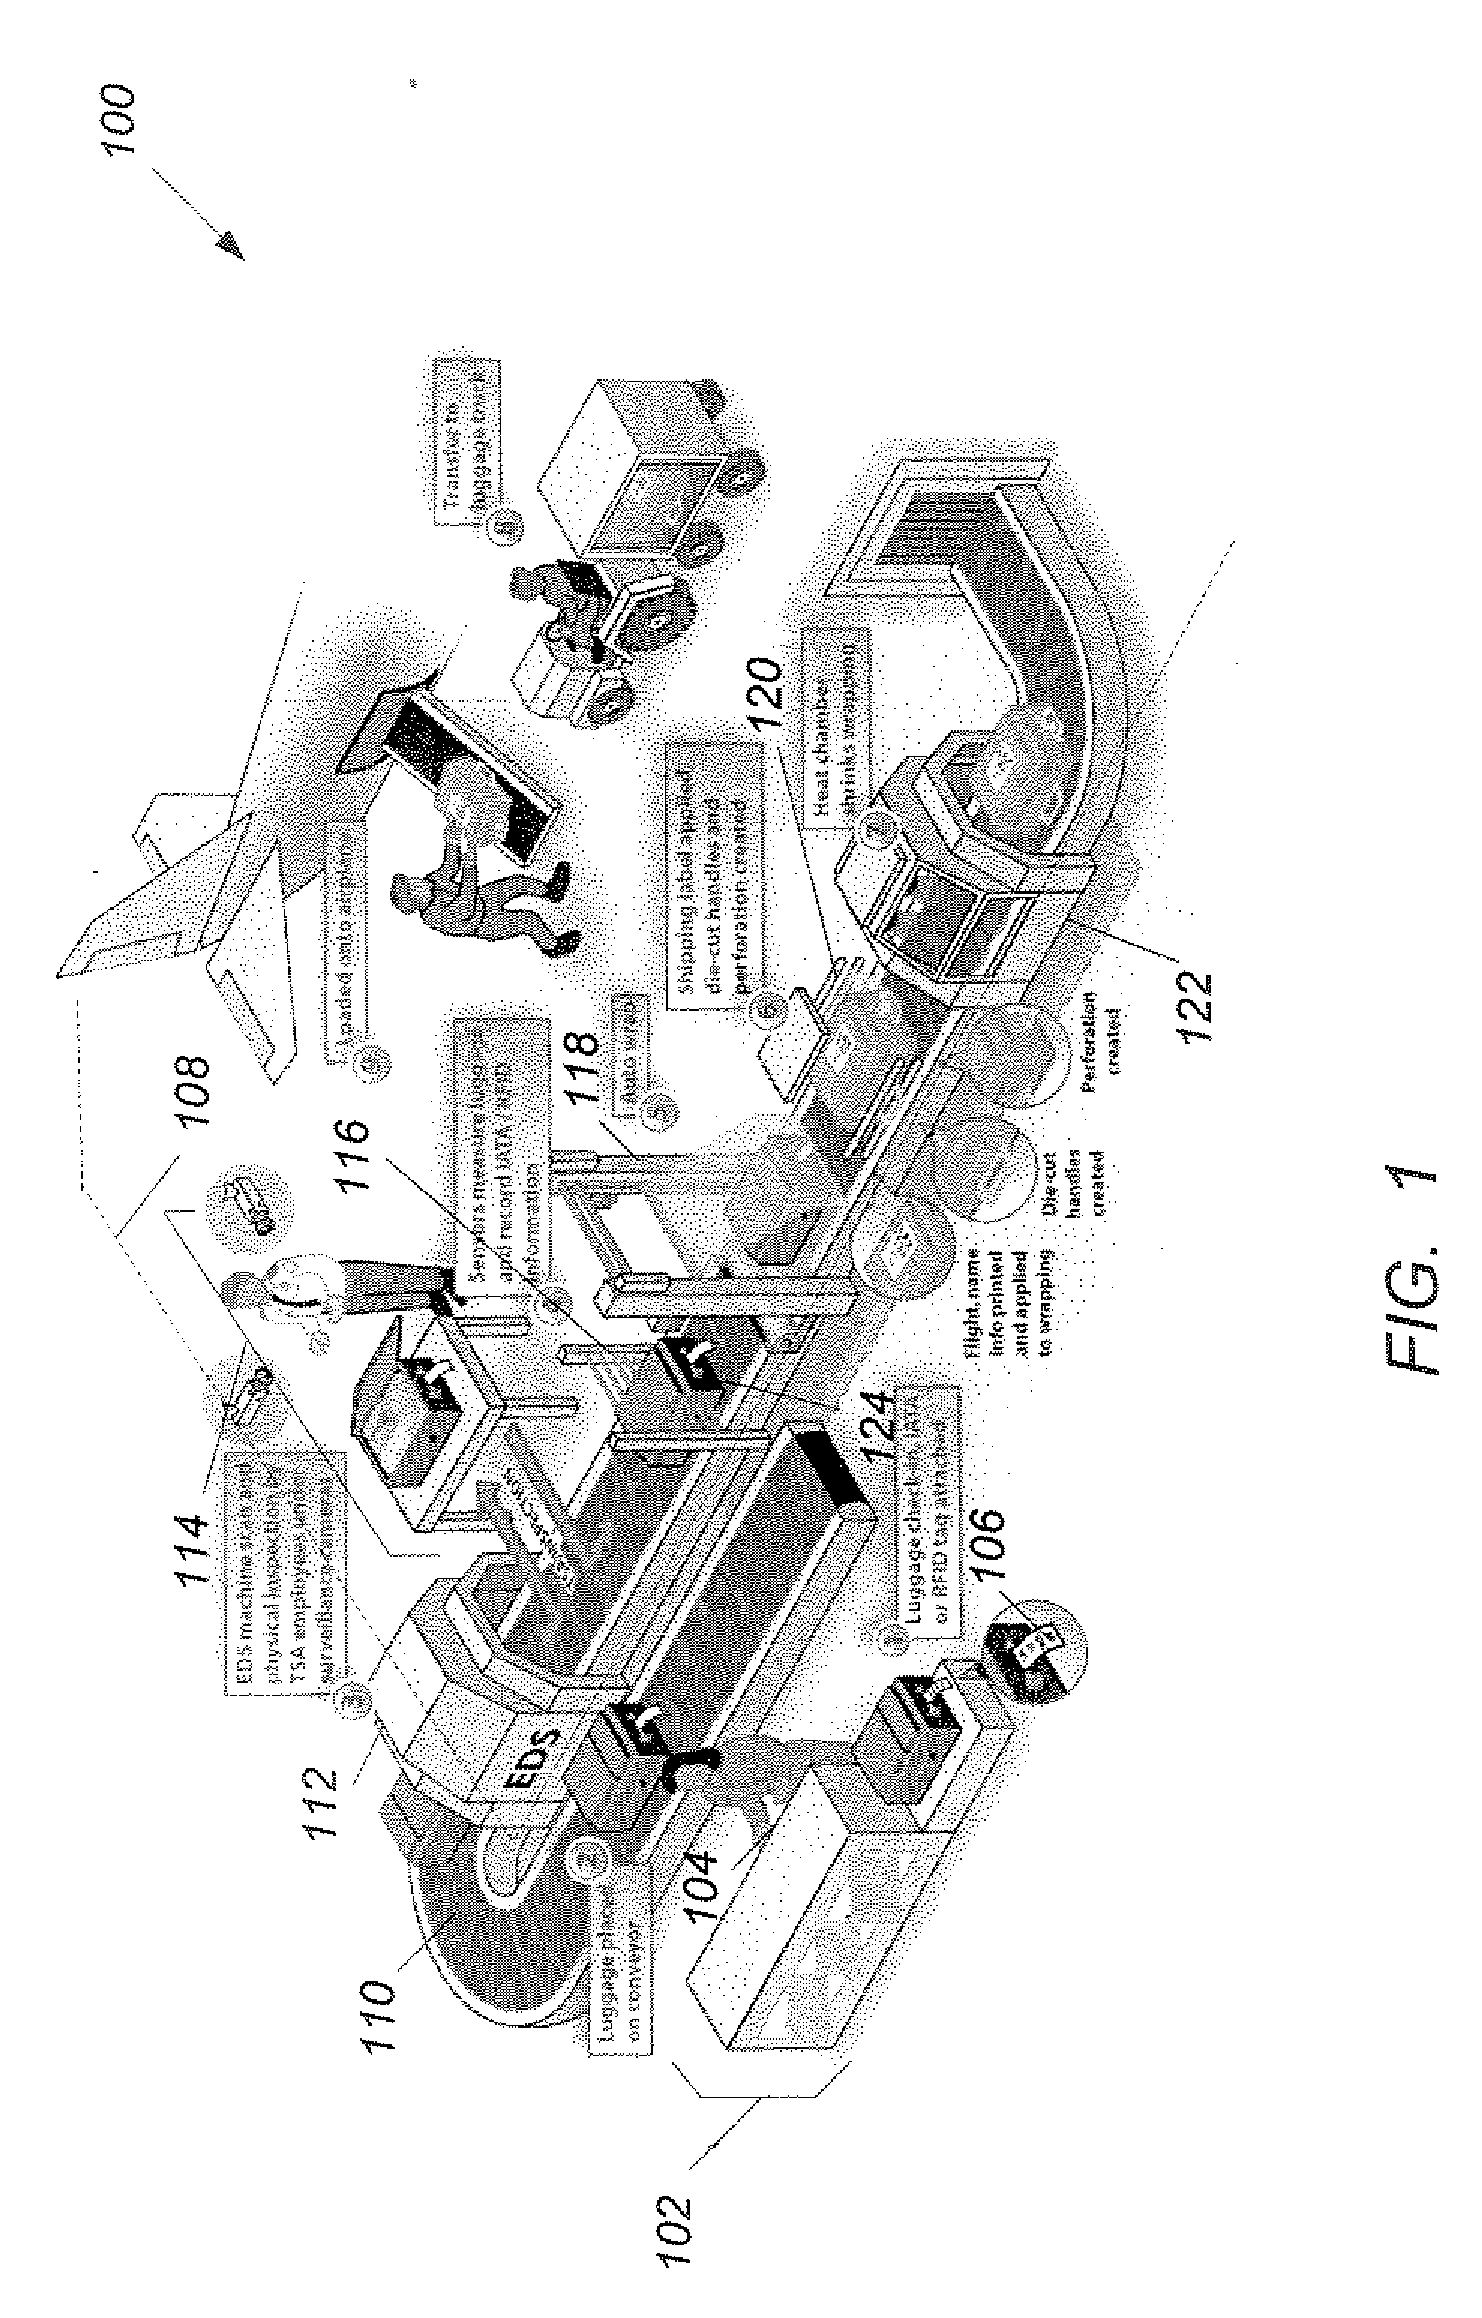 Method and apparatus for preventing luggage mishandling in public transportation systems